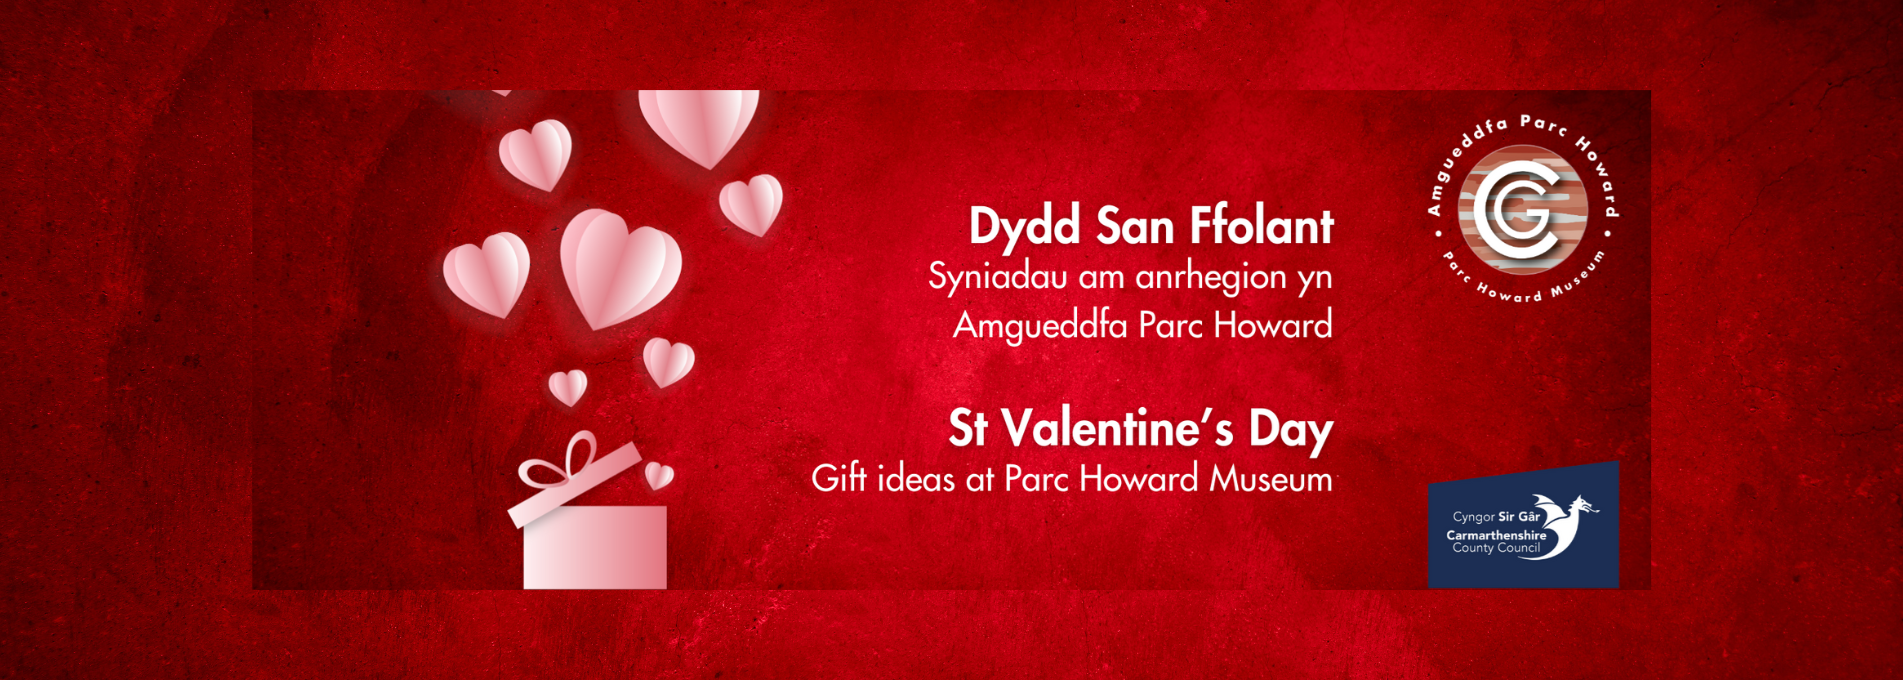 St Valentine's Day Gift Ideas at Parc Howard Museum